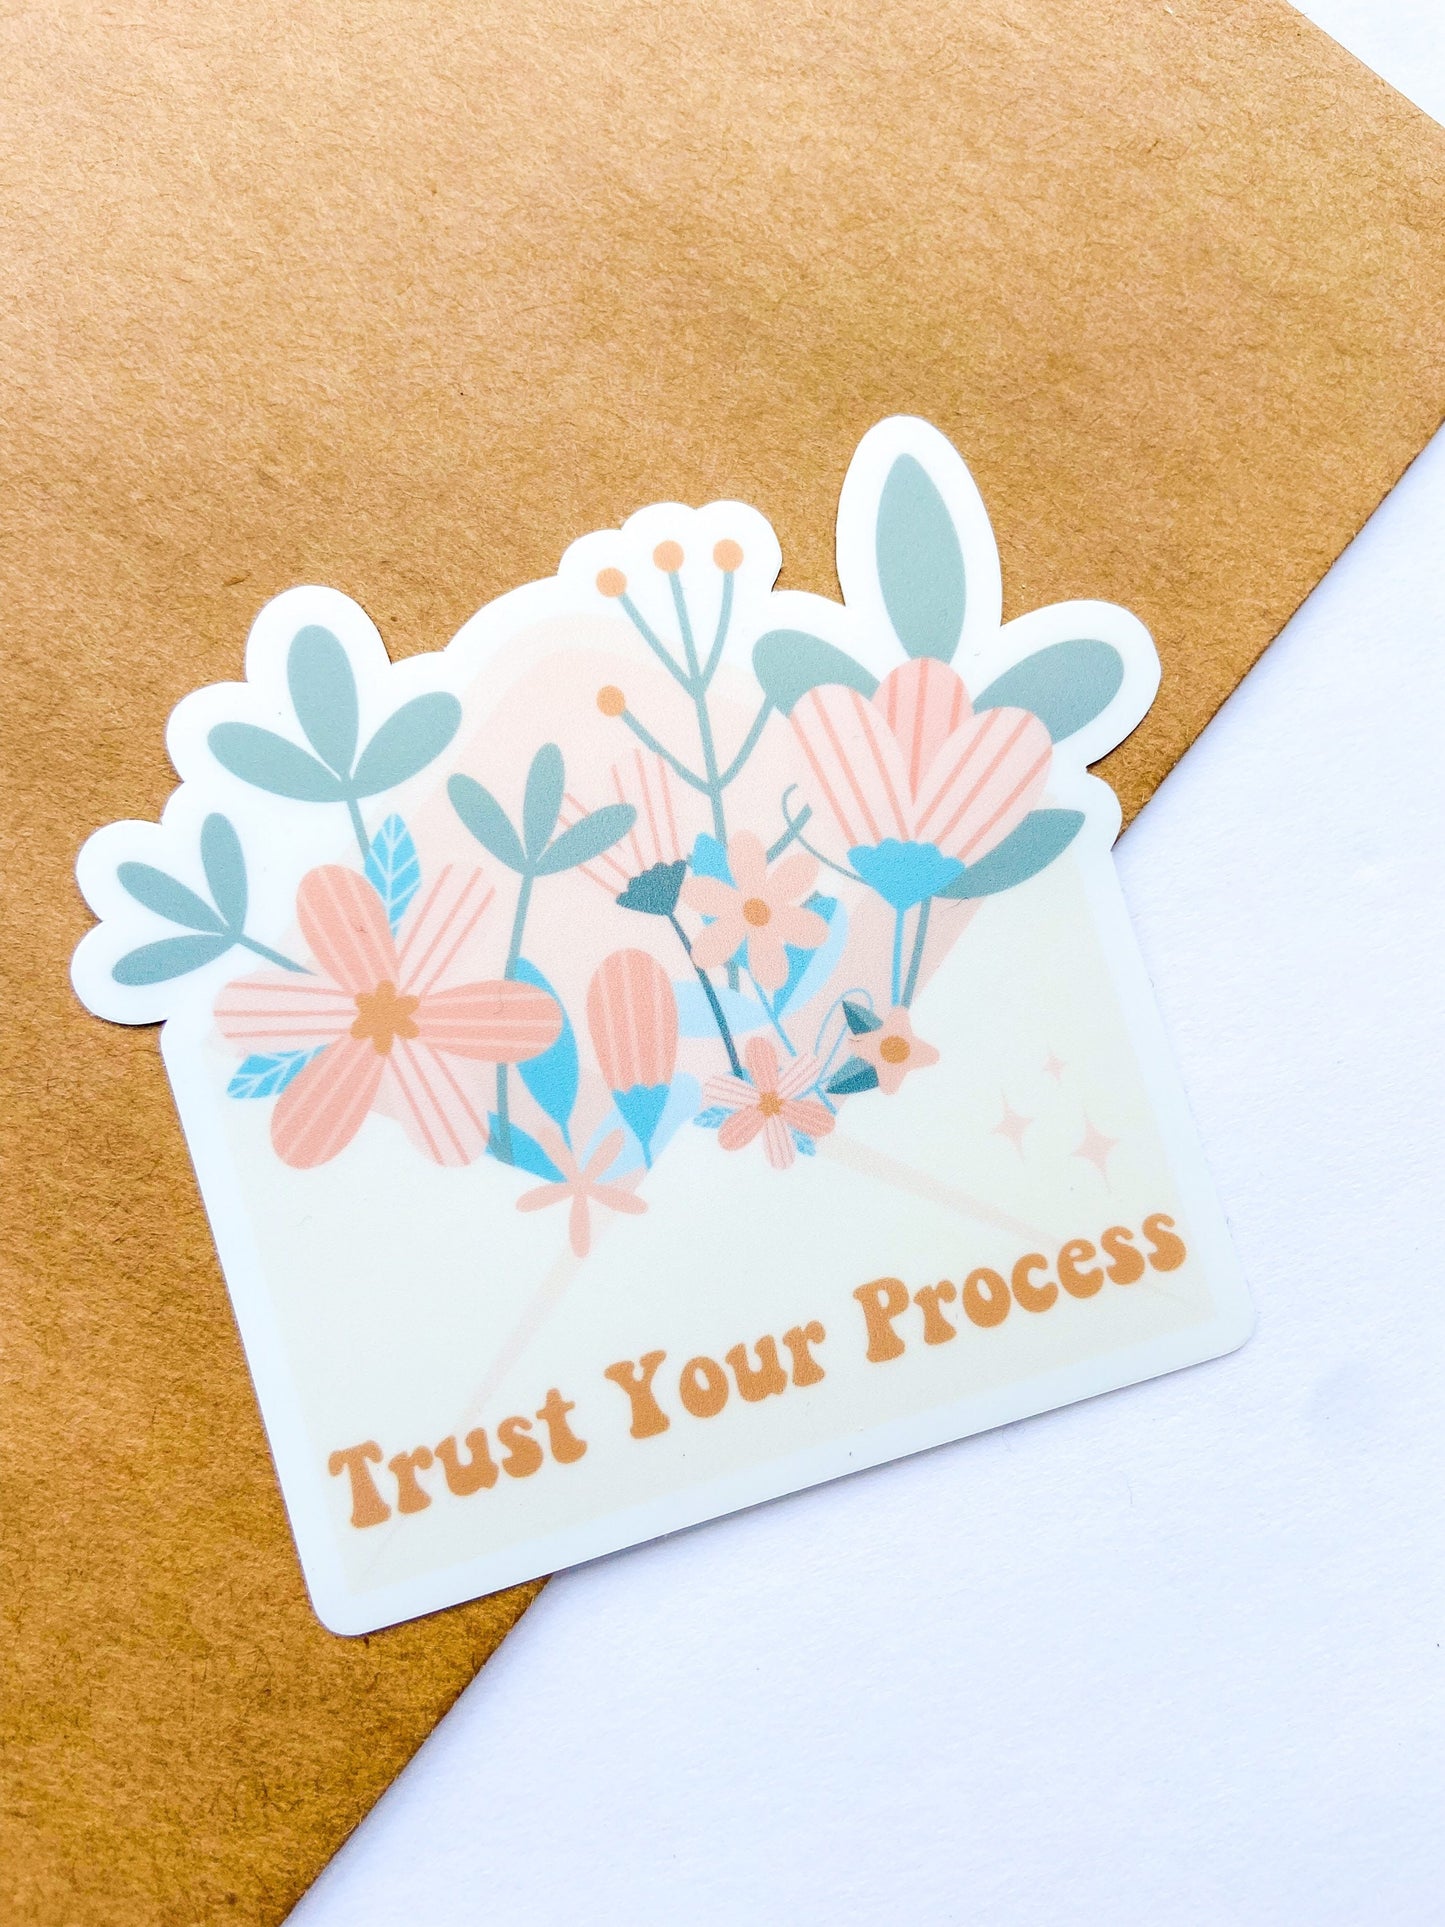 Floral Mental Health Sticker, Trust The Process Sticker, Floral Envelope Sticker, Botanical Sticker, Mental Health Sticker, Vinyl Stickers